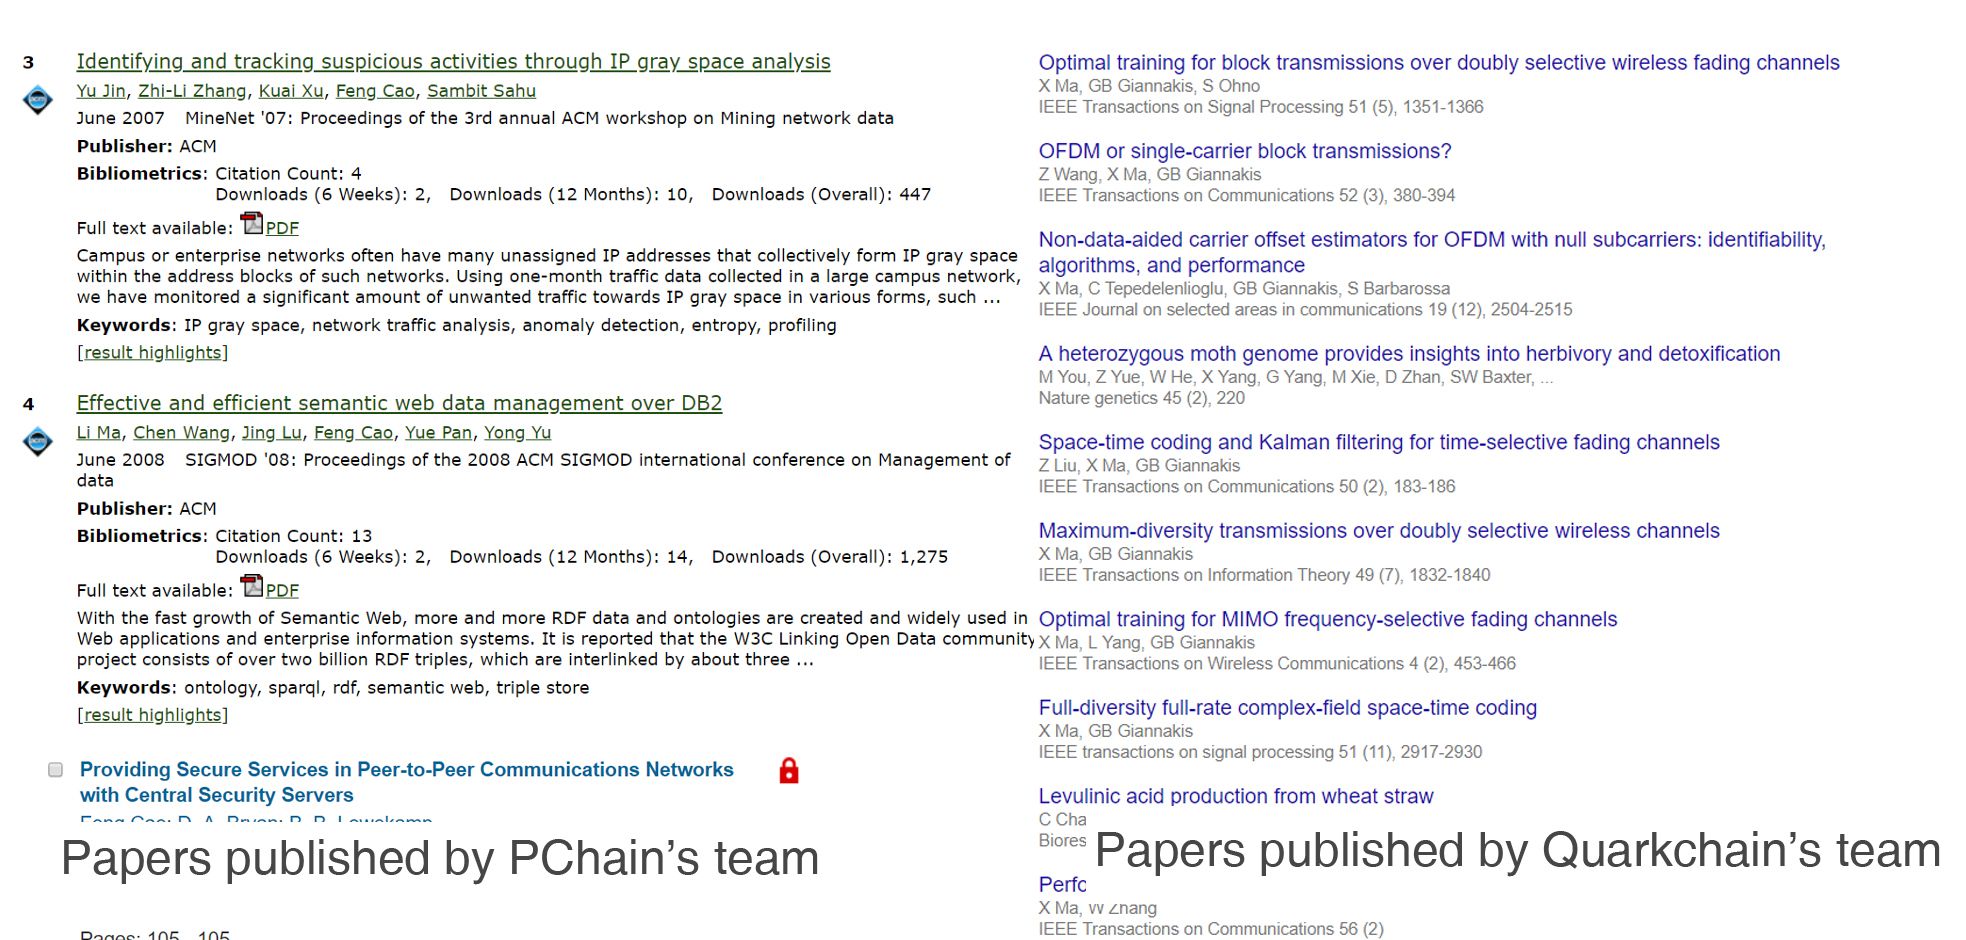 papers published by pchain and quarkchain.jpg